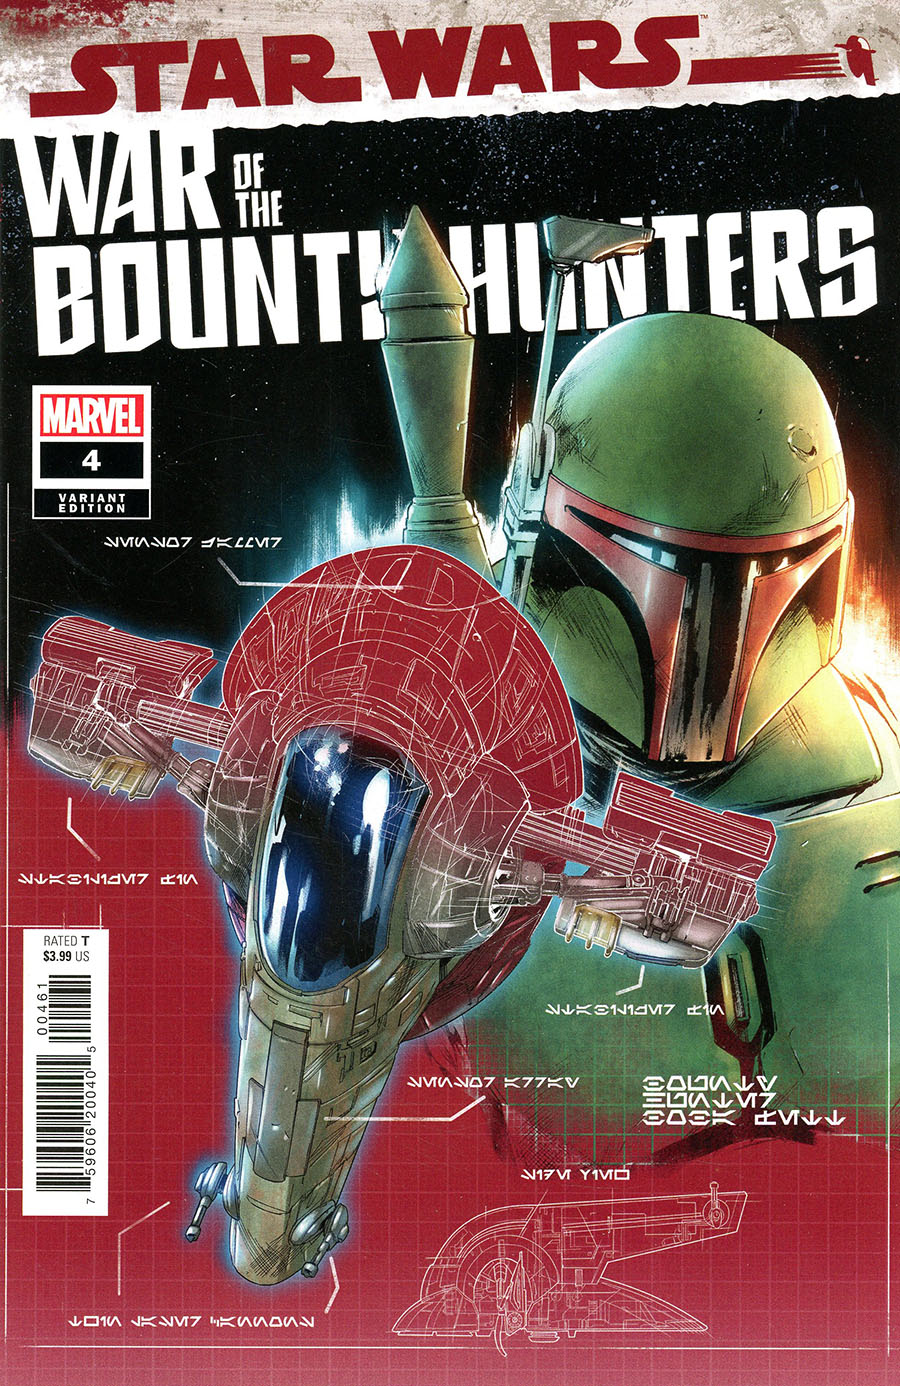 Star Wars War Of The Bounty Hunters #4 Cover B Variant Paolo Villanelli Bounty Hunter Ship Blueprint Cover